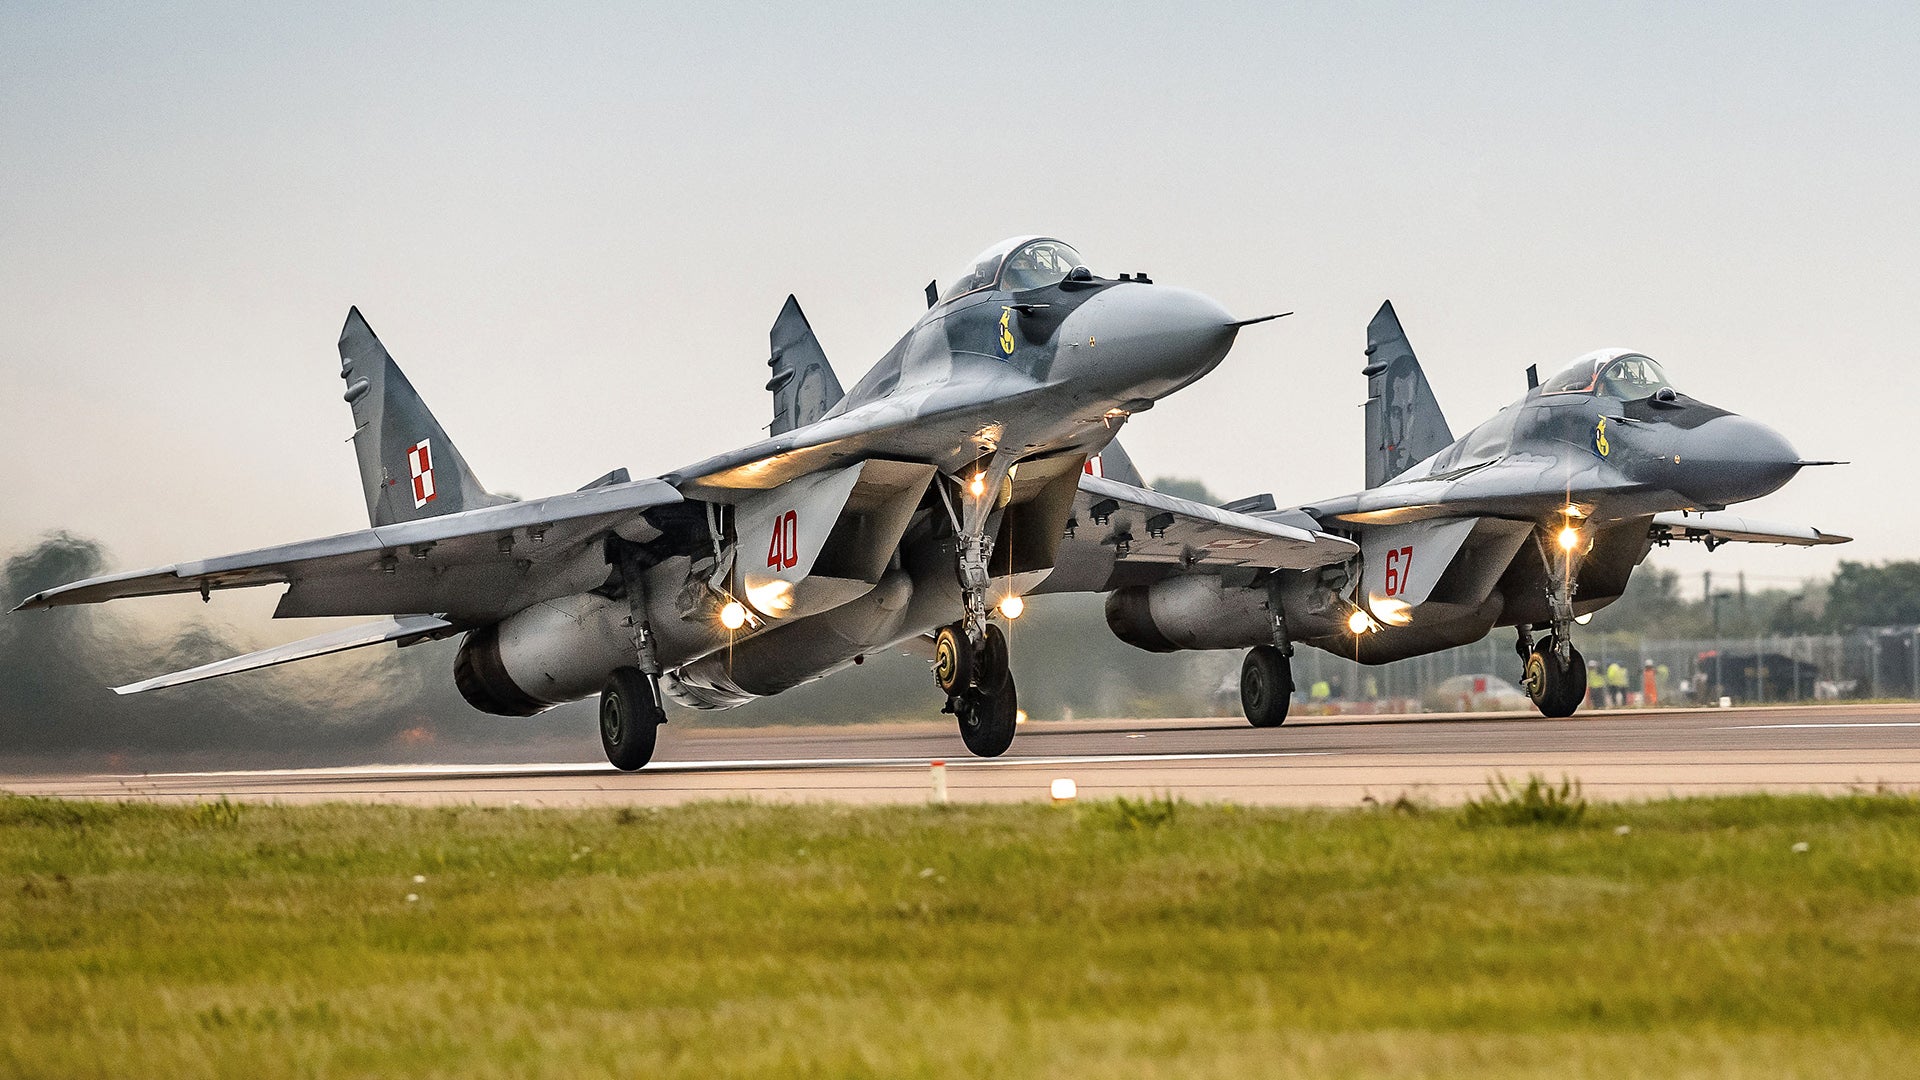 Here Are The Options For The EU's Initiative To Restock Ukraine With Fighter Jets (Updated)